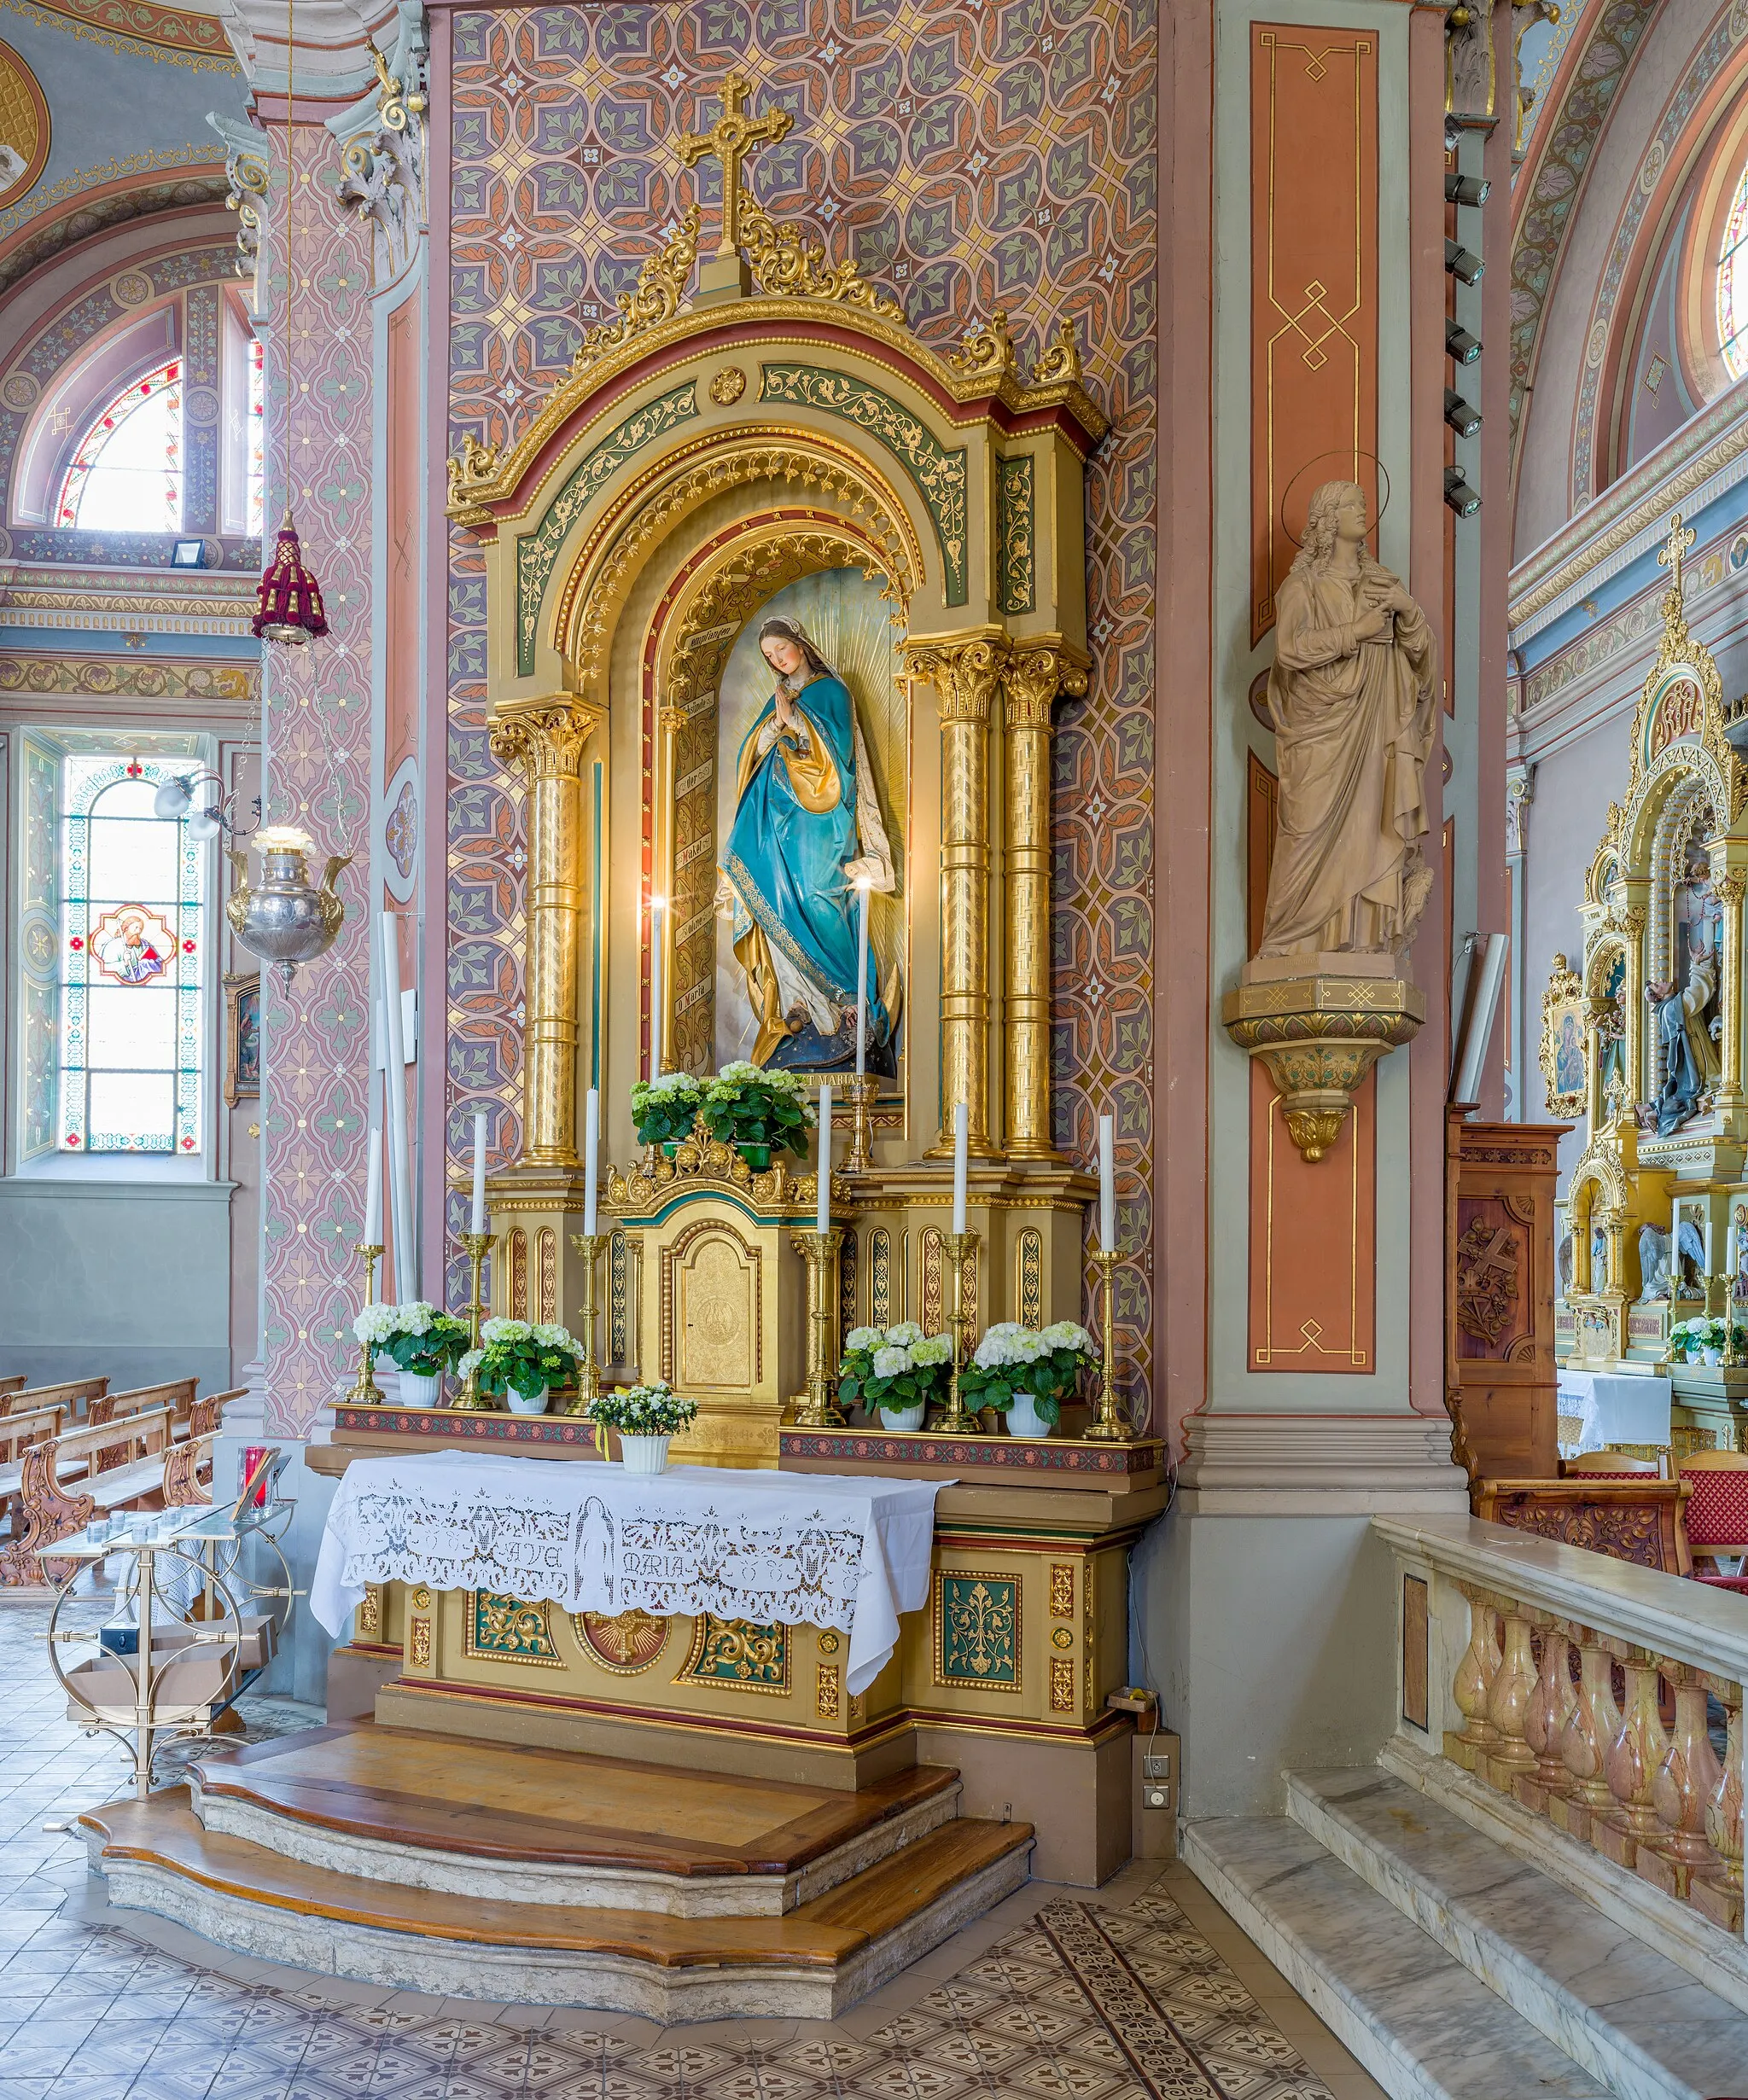 Photo showing: Altar of the Virgin Mary in the parish church  of Urtijëi 1870. Statue of Virgin Mary by Sculptor Josef Moroder-Lusenberg.